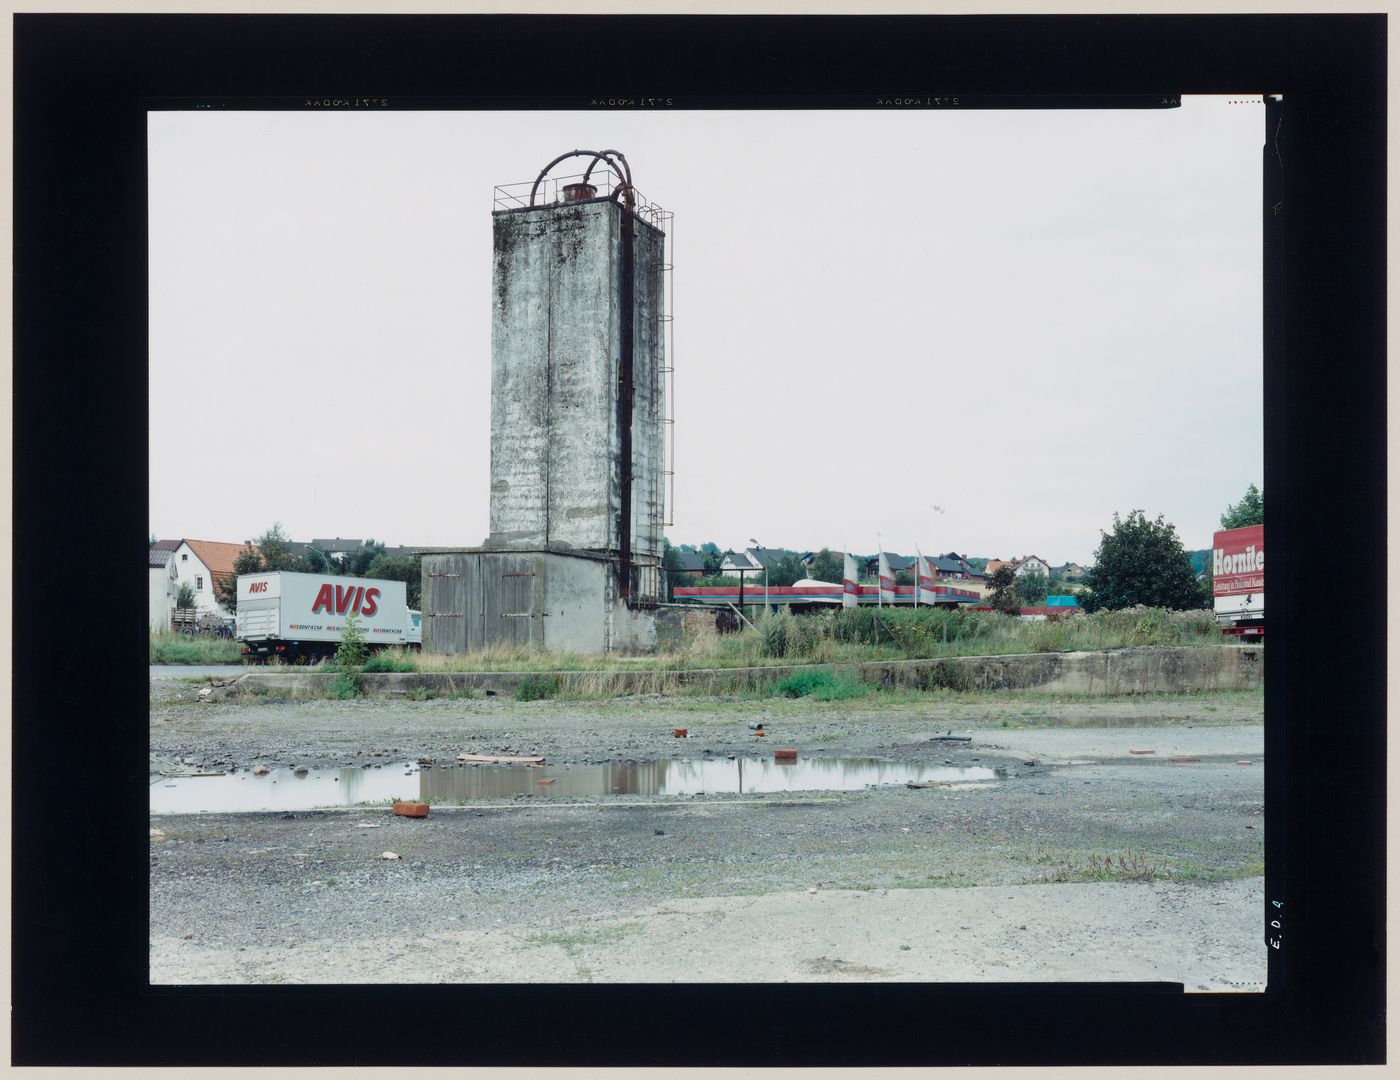 View of a silo and a vacant lot showing houses in the background, Ummendorf, near Magdeburg, Germany (from the series "In between cities")